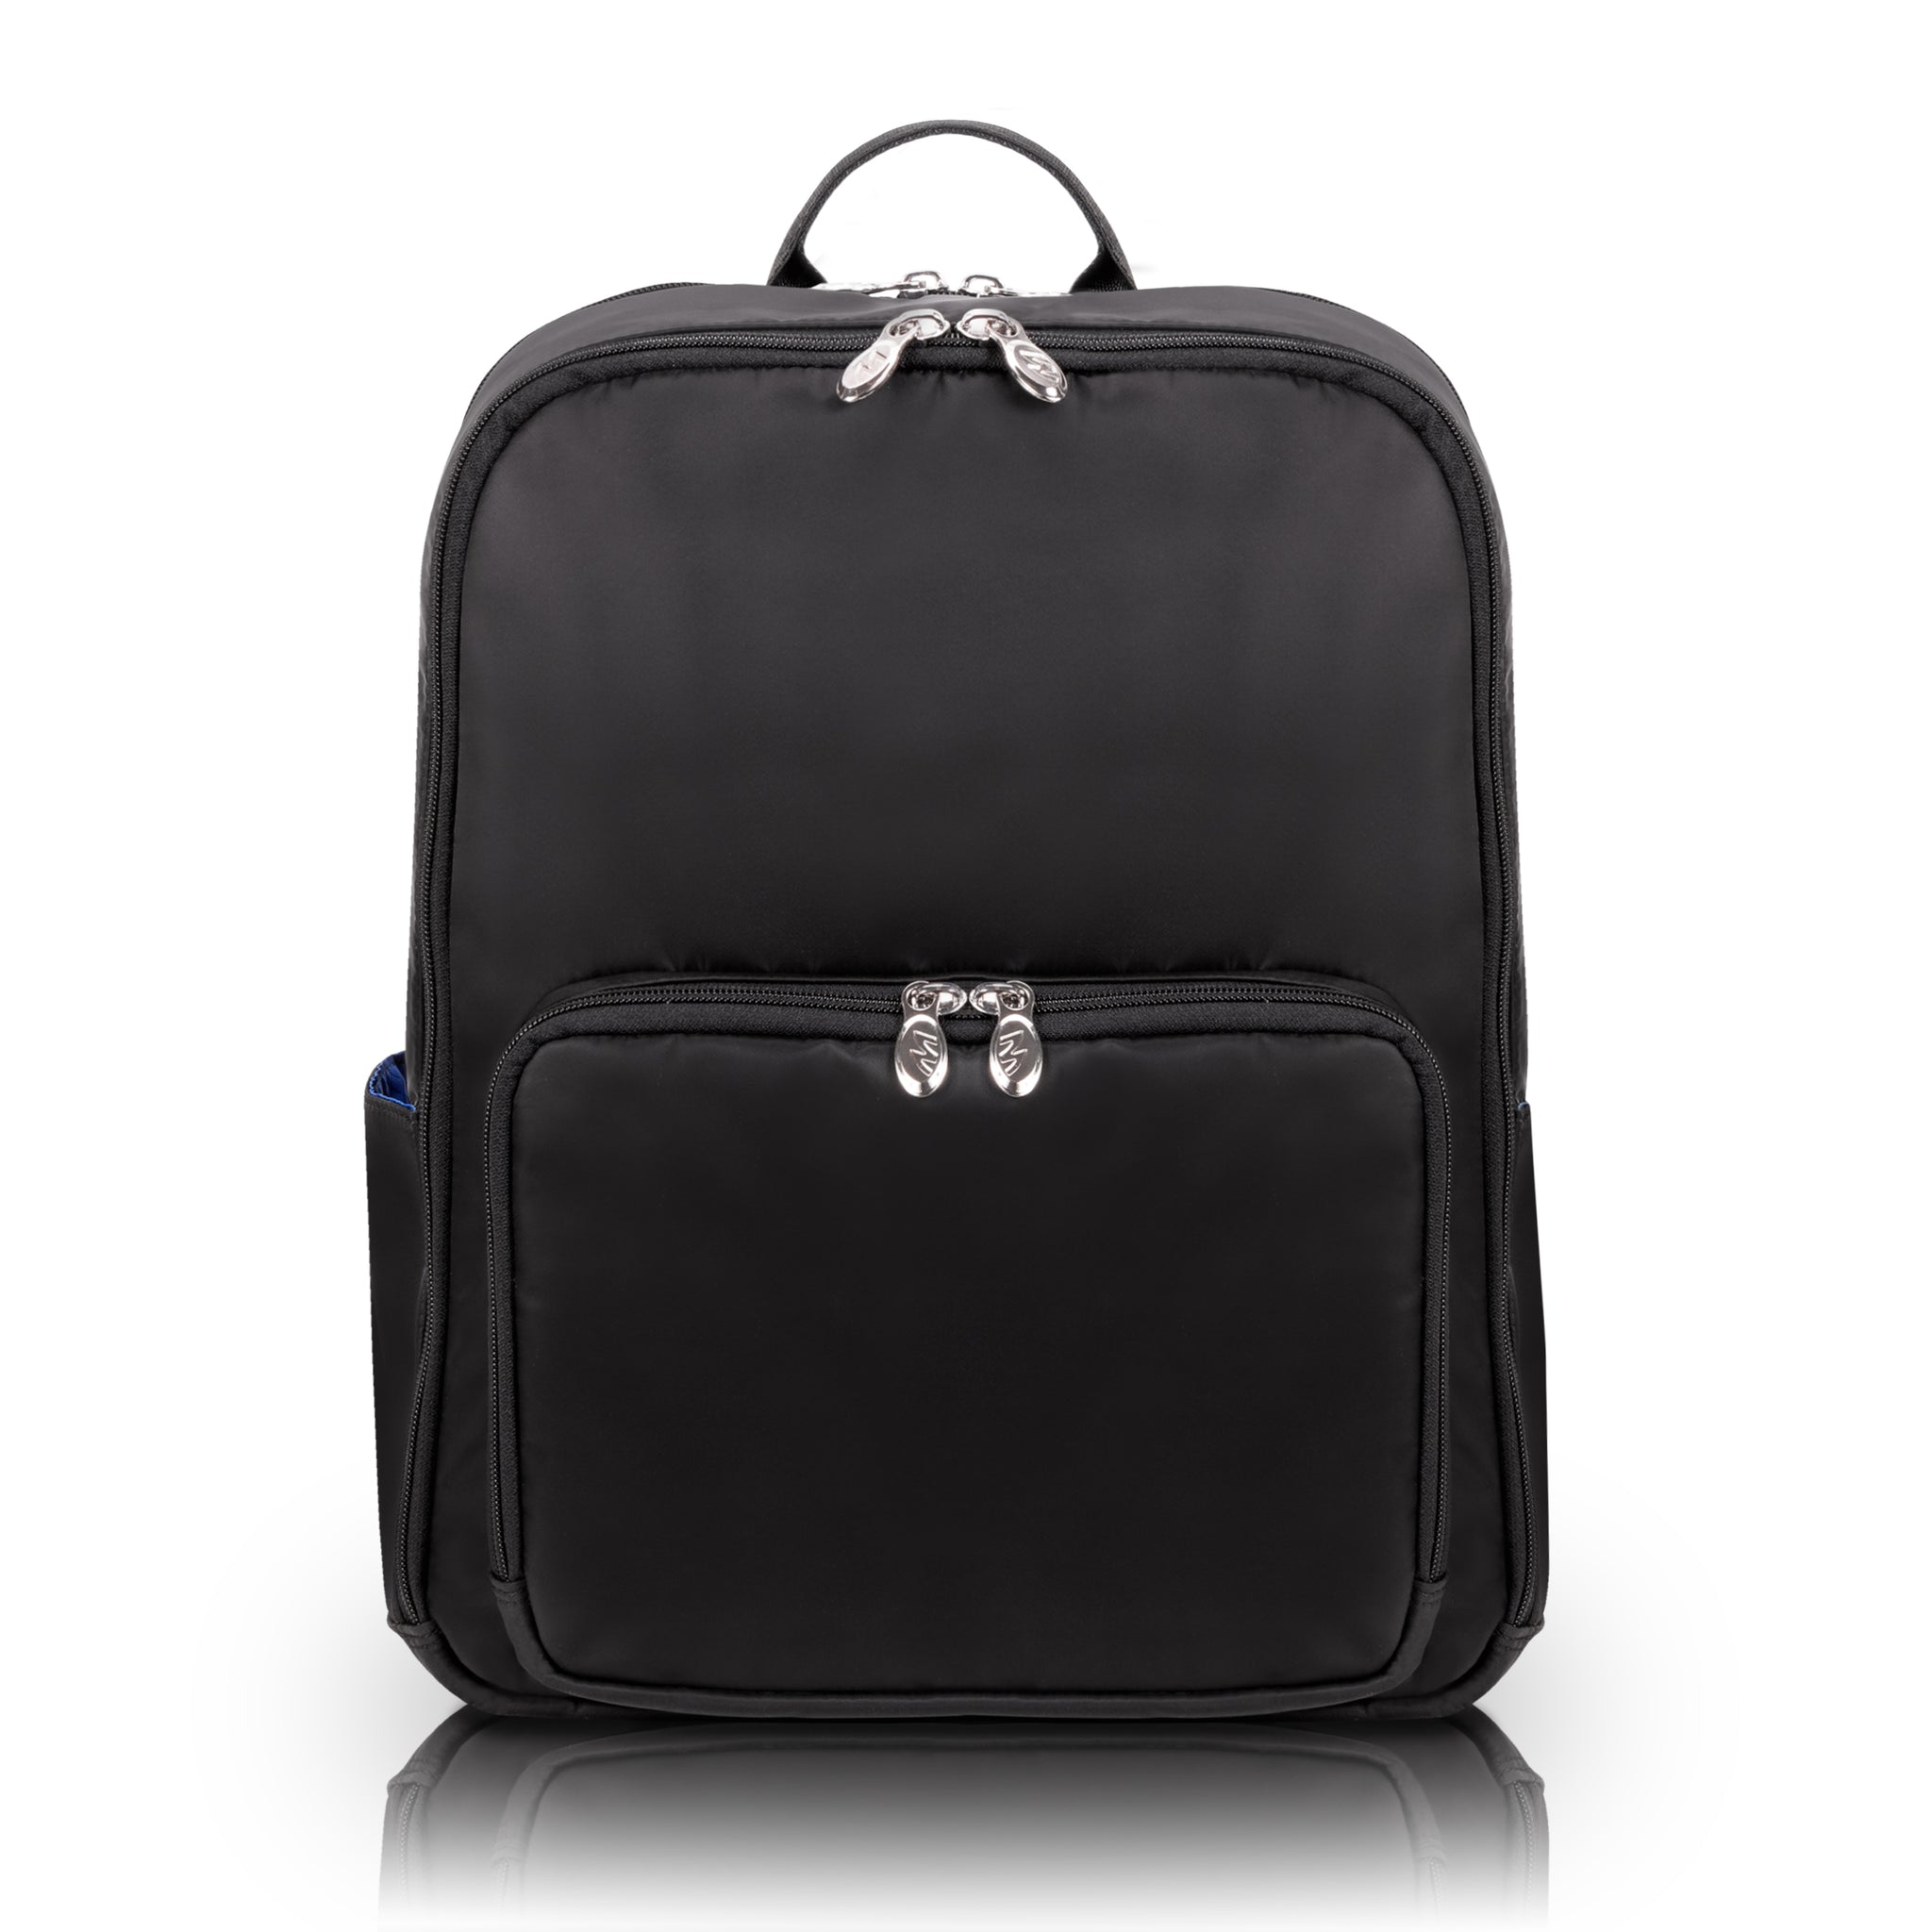 15" Nylon Dual-Compartment Backpack Front View